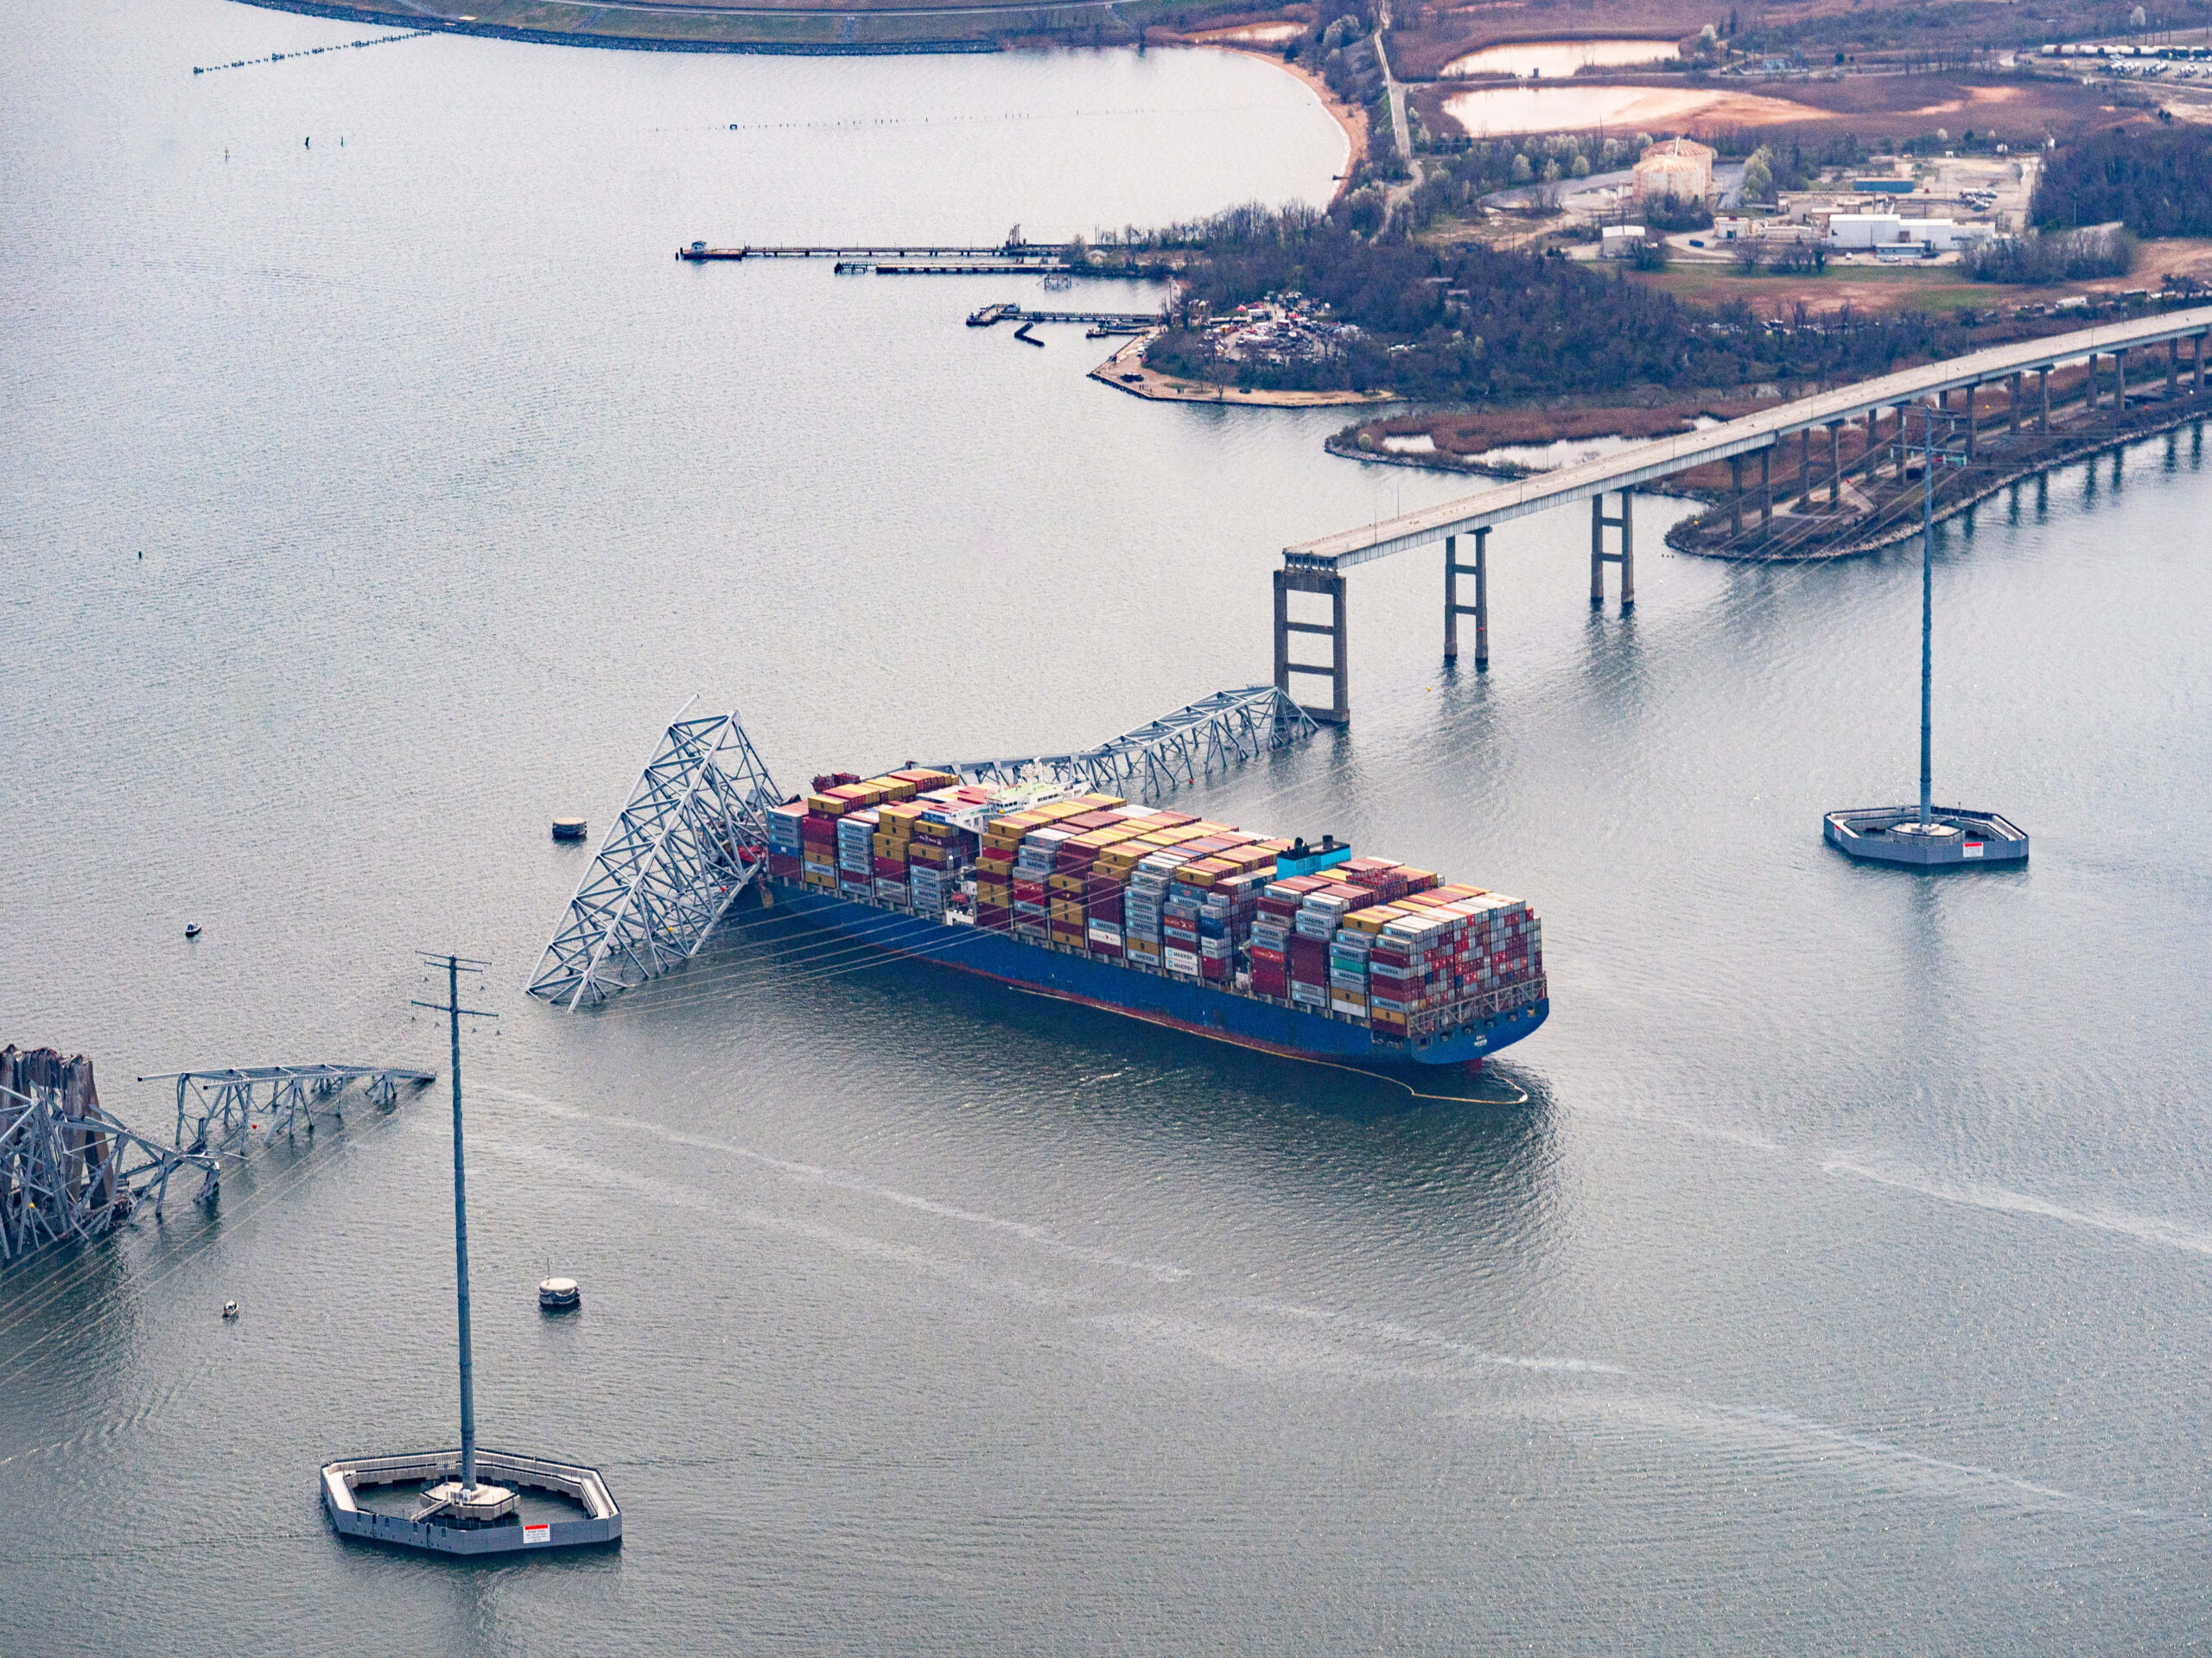 The Dali container vessel after striking the Francis Scott Key Bridge that collapsed into the Patapsco River in Baltimore, on Tuesday. The Port of Baltimore, which has the highest volume of auto imports in the U.S., is now temporarily closed.